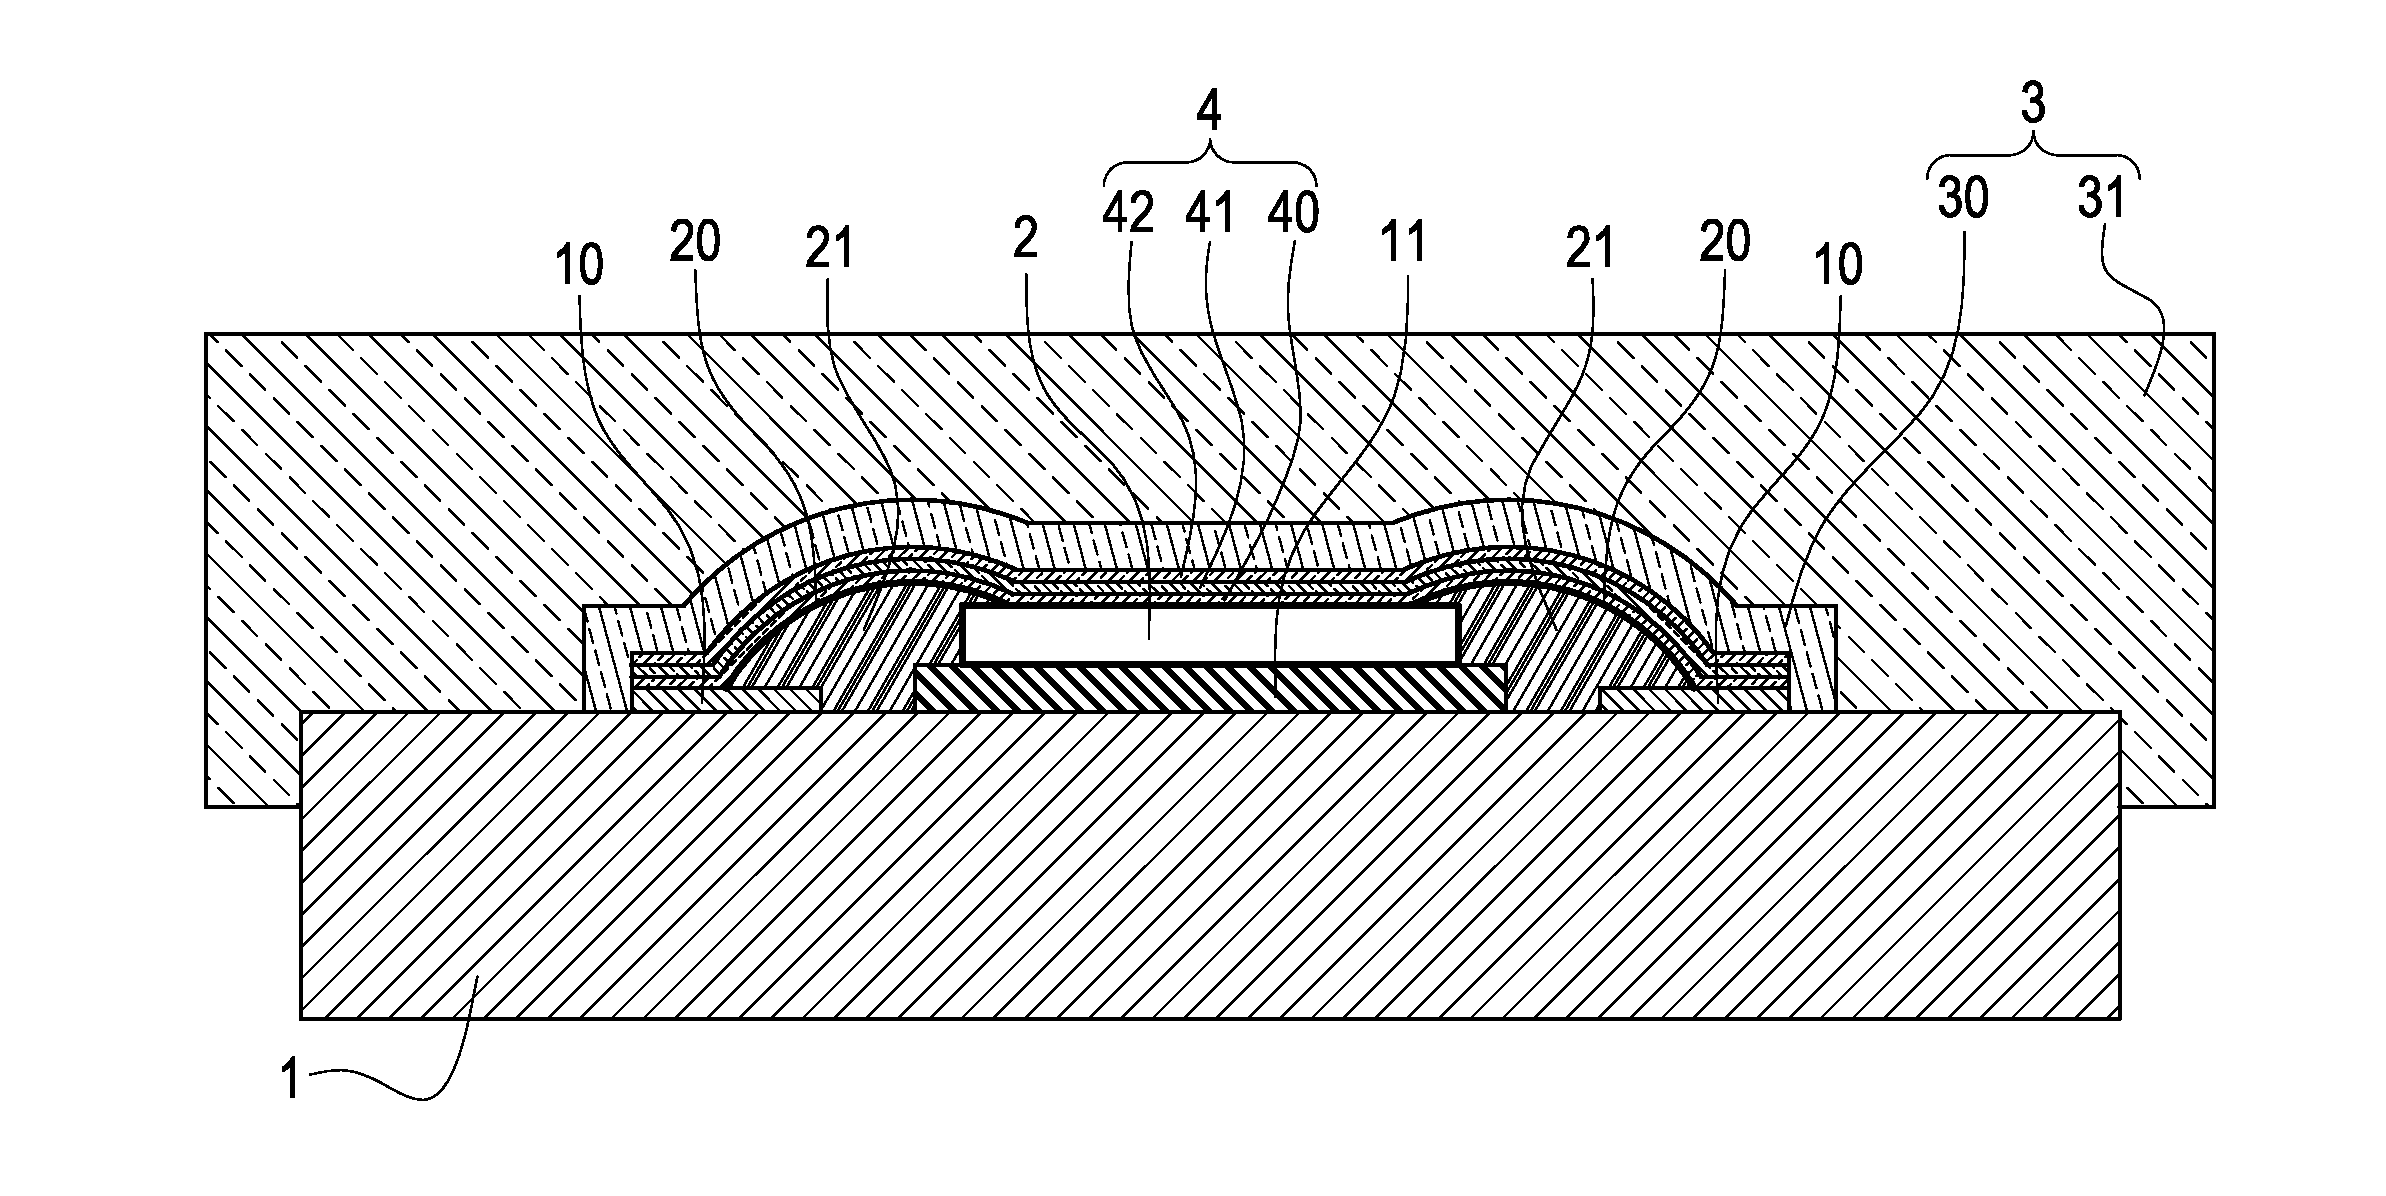 LED package structure and manufacturing method for the same